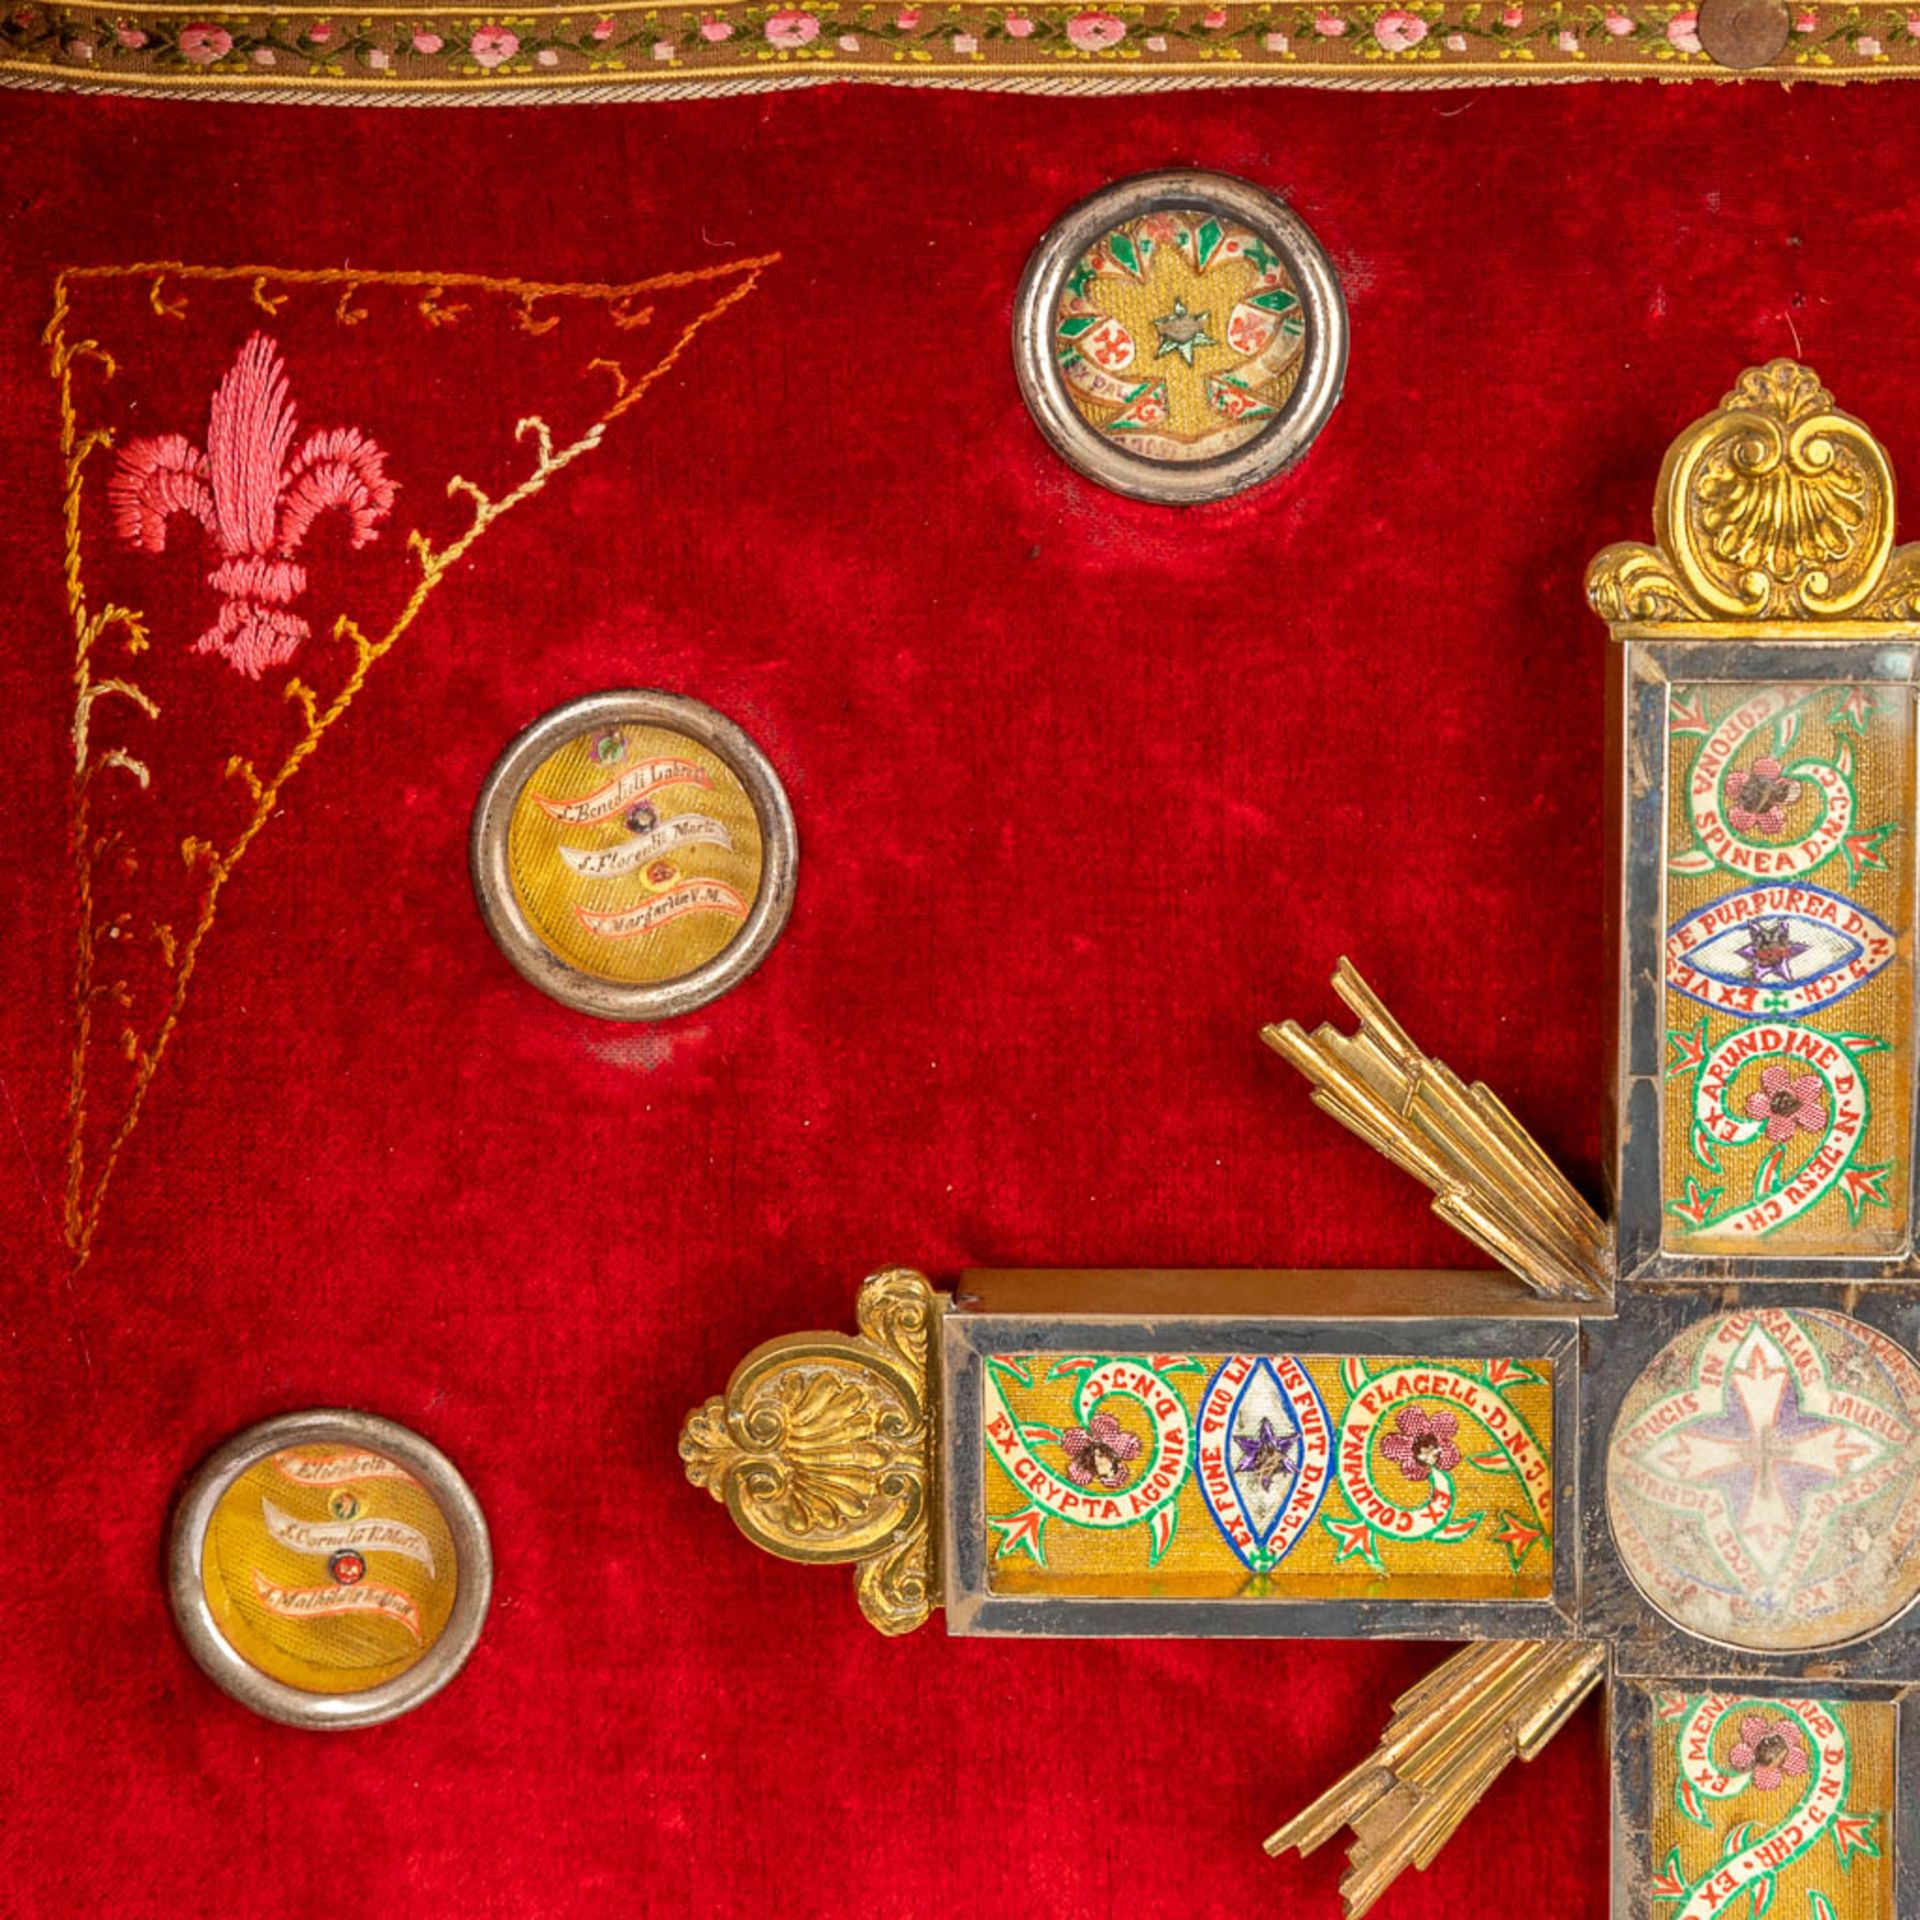 An antique reliquary box with relics a relic crucifix and embroidery. (L:13 x W:52 x H:75 cm) - Image 18 of 23